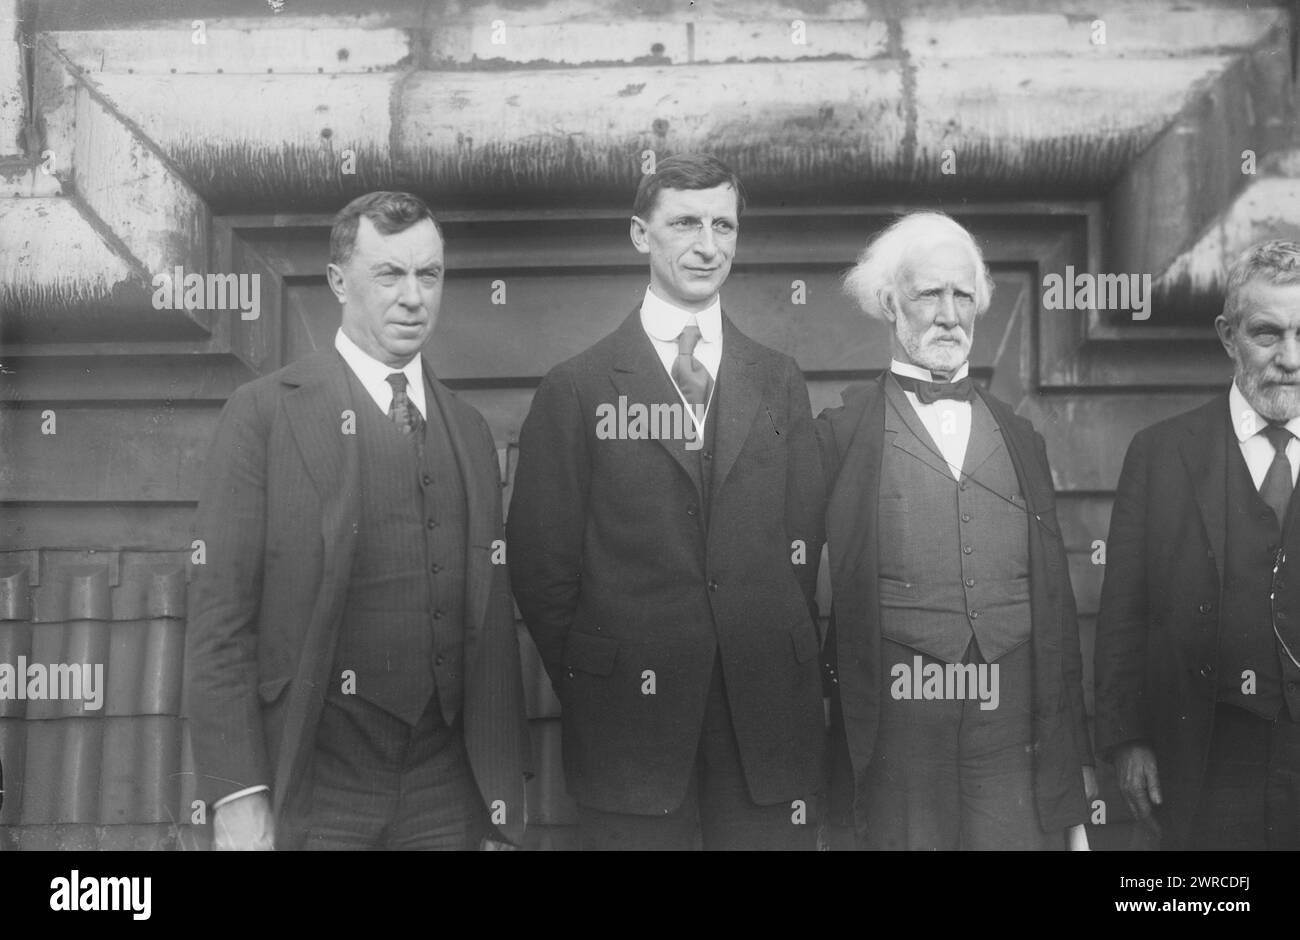 Cohalan, De Valera, Goff, Devoy, Photograph shows Daniel Florence Cohalan (1867-1946), Eamon de Valera (1882-1975), John Goff (1846-1924) and John Devoy (1842-1928) at the Waldorf Astoria, New York City in March 1919 to commemorate de Valera's campaign for Irish independence in the United States., 1919 March, Glass negatives, 1 negative: glass Stock Photo